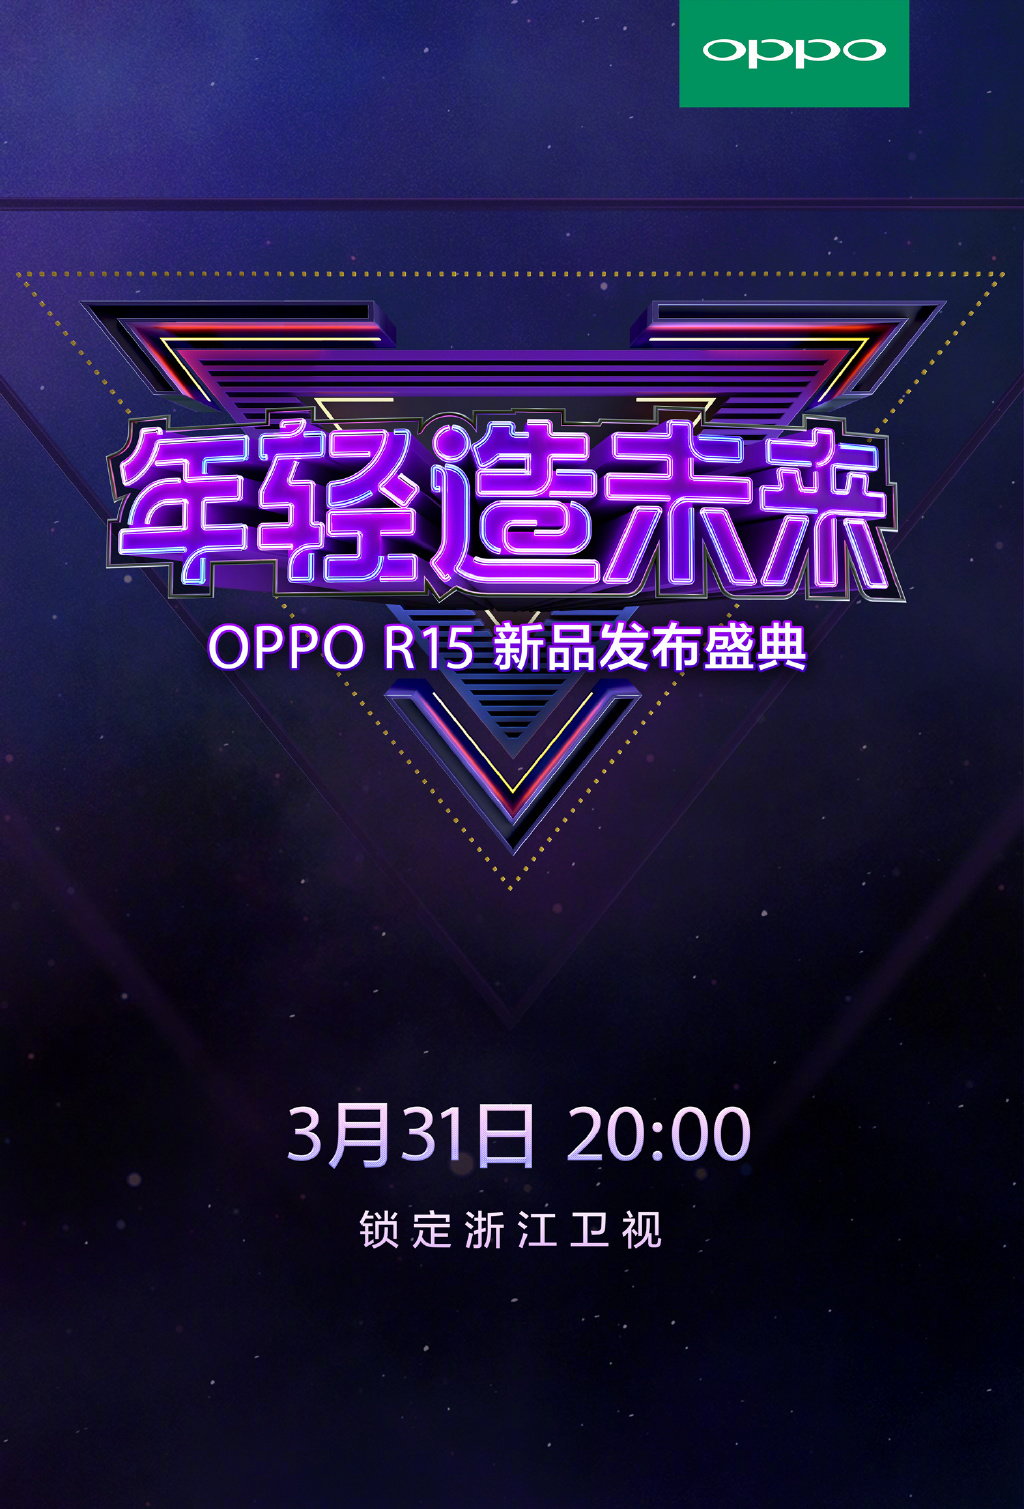 OPPO R15 launch poster